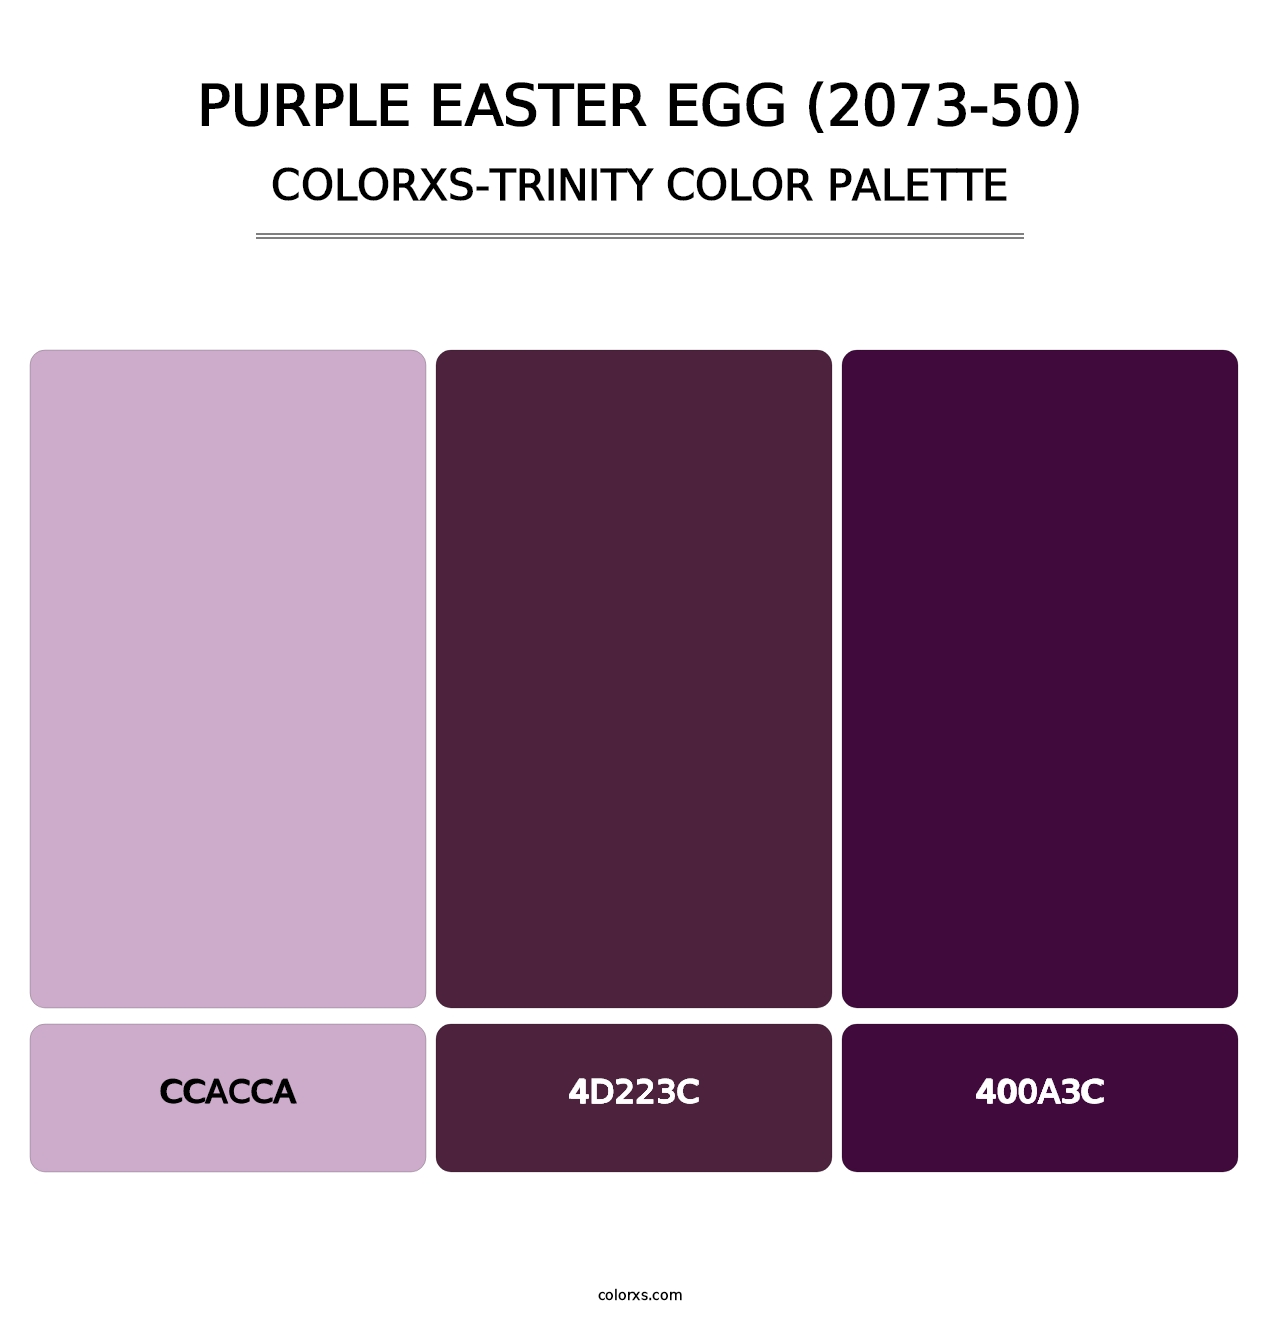 Purple Easter Egg (2073-50) - Colorxs Trinity Palette